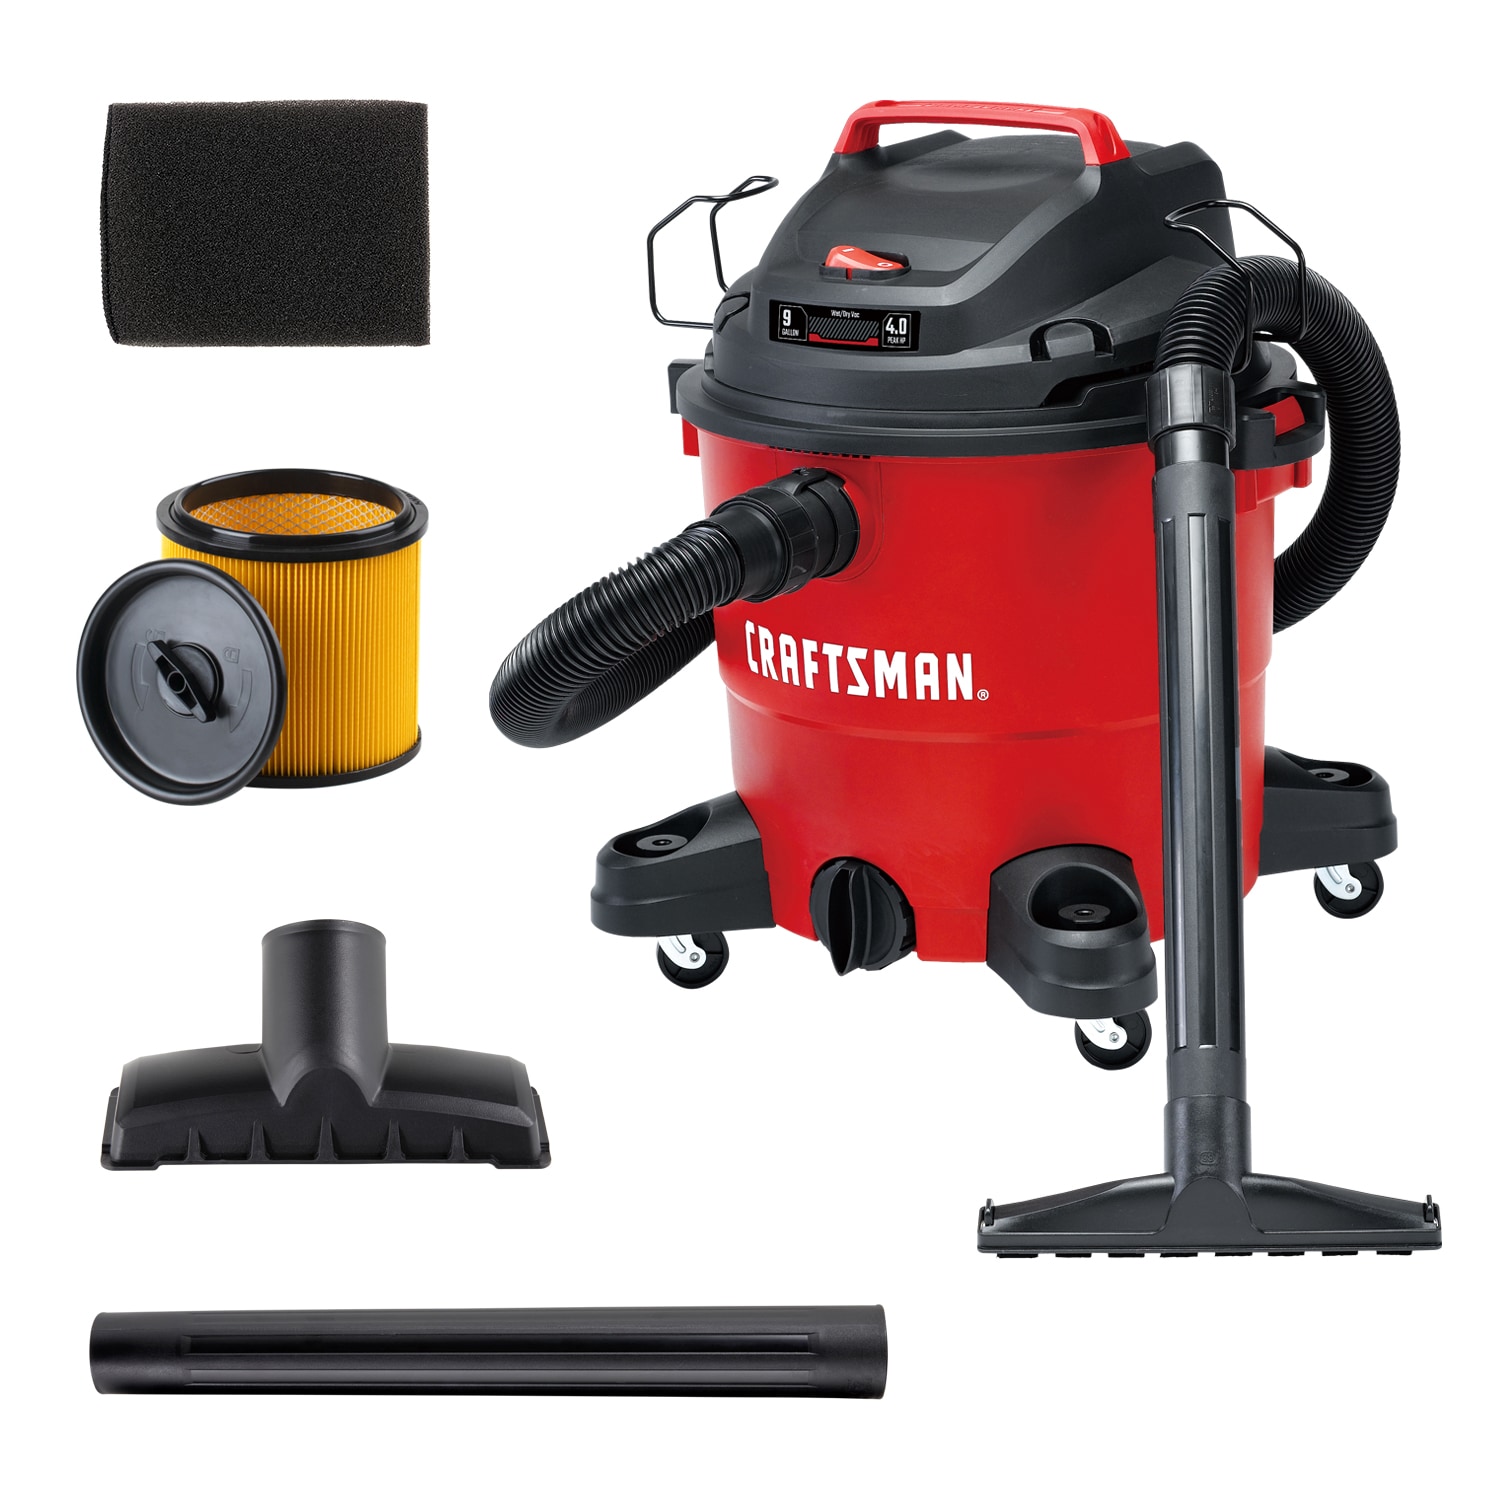 CRAFTSMAN 9-Gallons 4-HP Corded Wet/Dry Shop Vacuum with